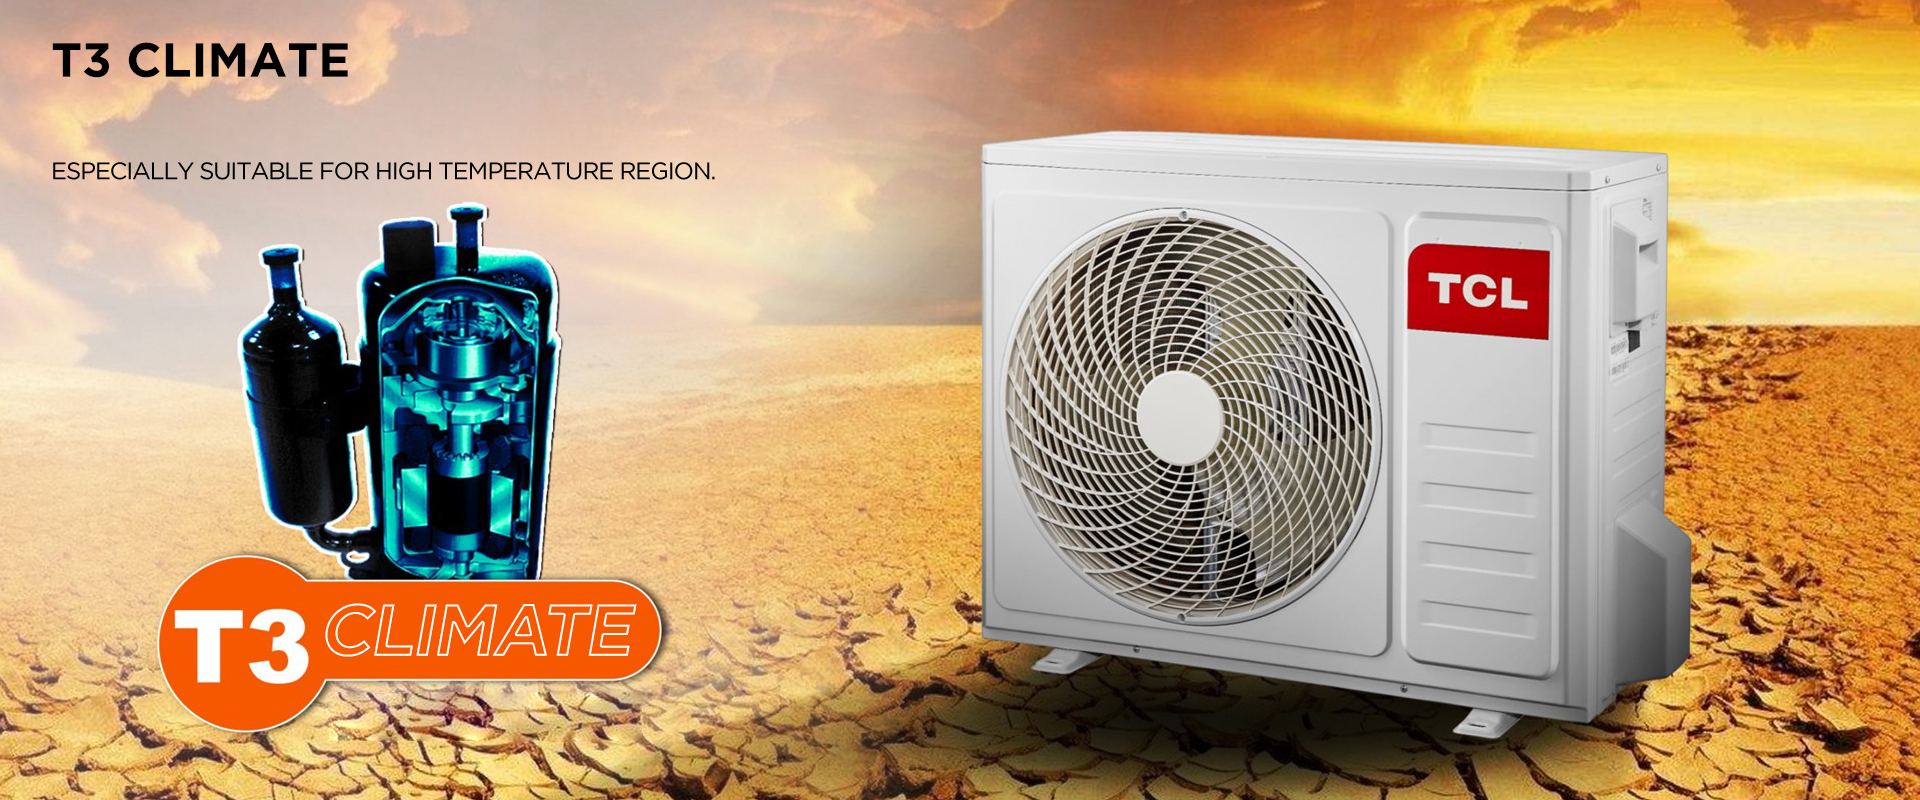 T3 CLIMATE - Especially suitable for high temperature region.